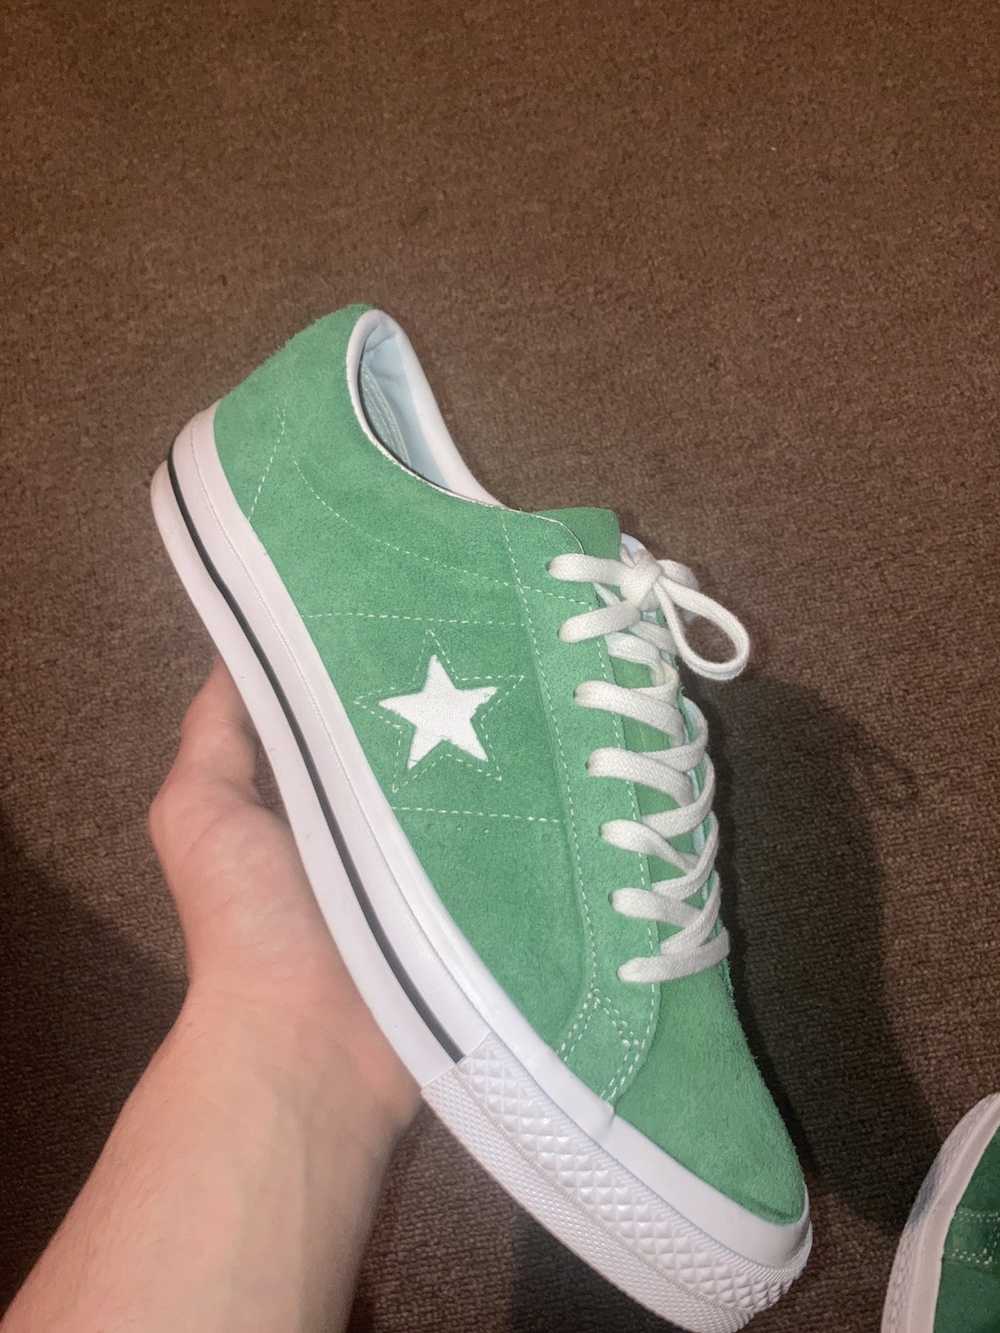 Converse One Star Ox Green Suede - image 2